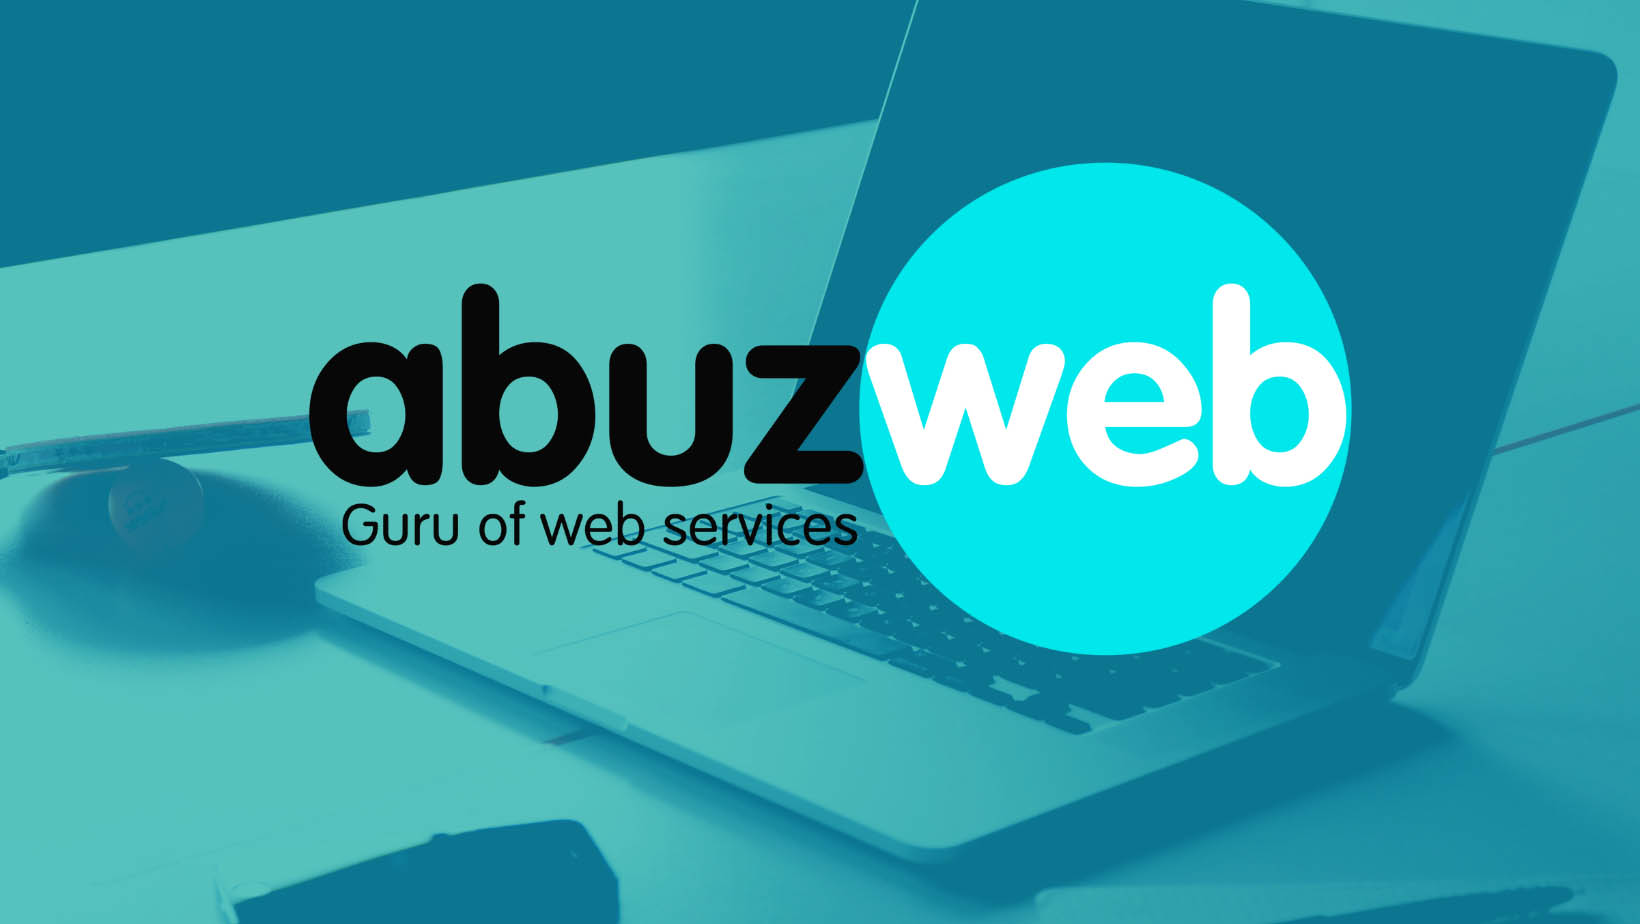 Why choose AbuzWeb web agency for your web services? | AbuzWeb, #1 web services agency, based in Benin, Africa and Colorado, USA